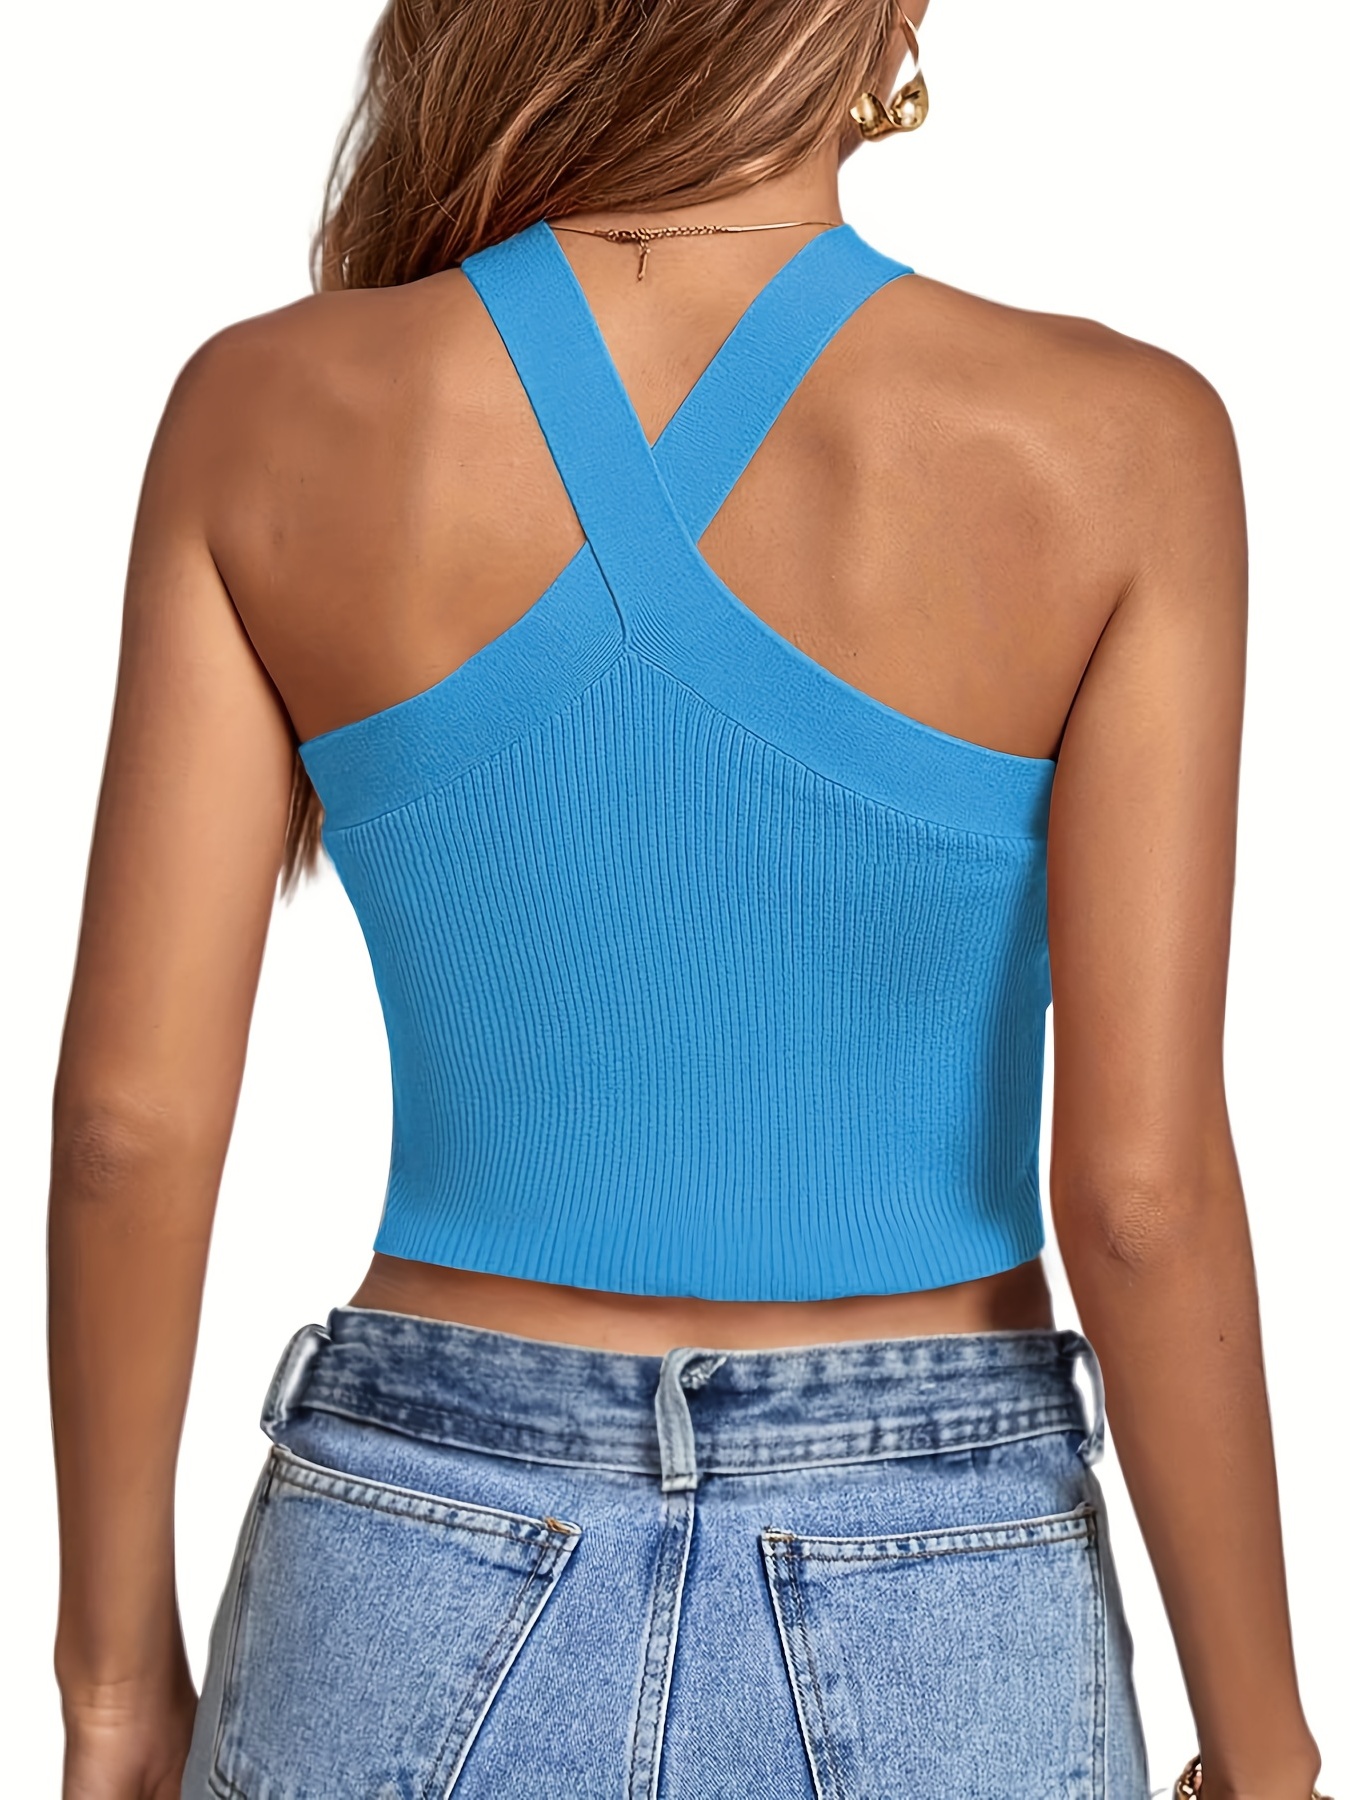  PJRYC Women Halter Tops Female Knitted Off Shoulder